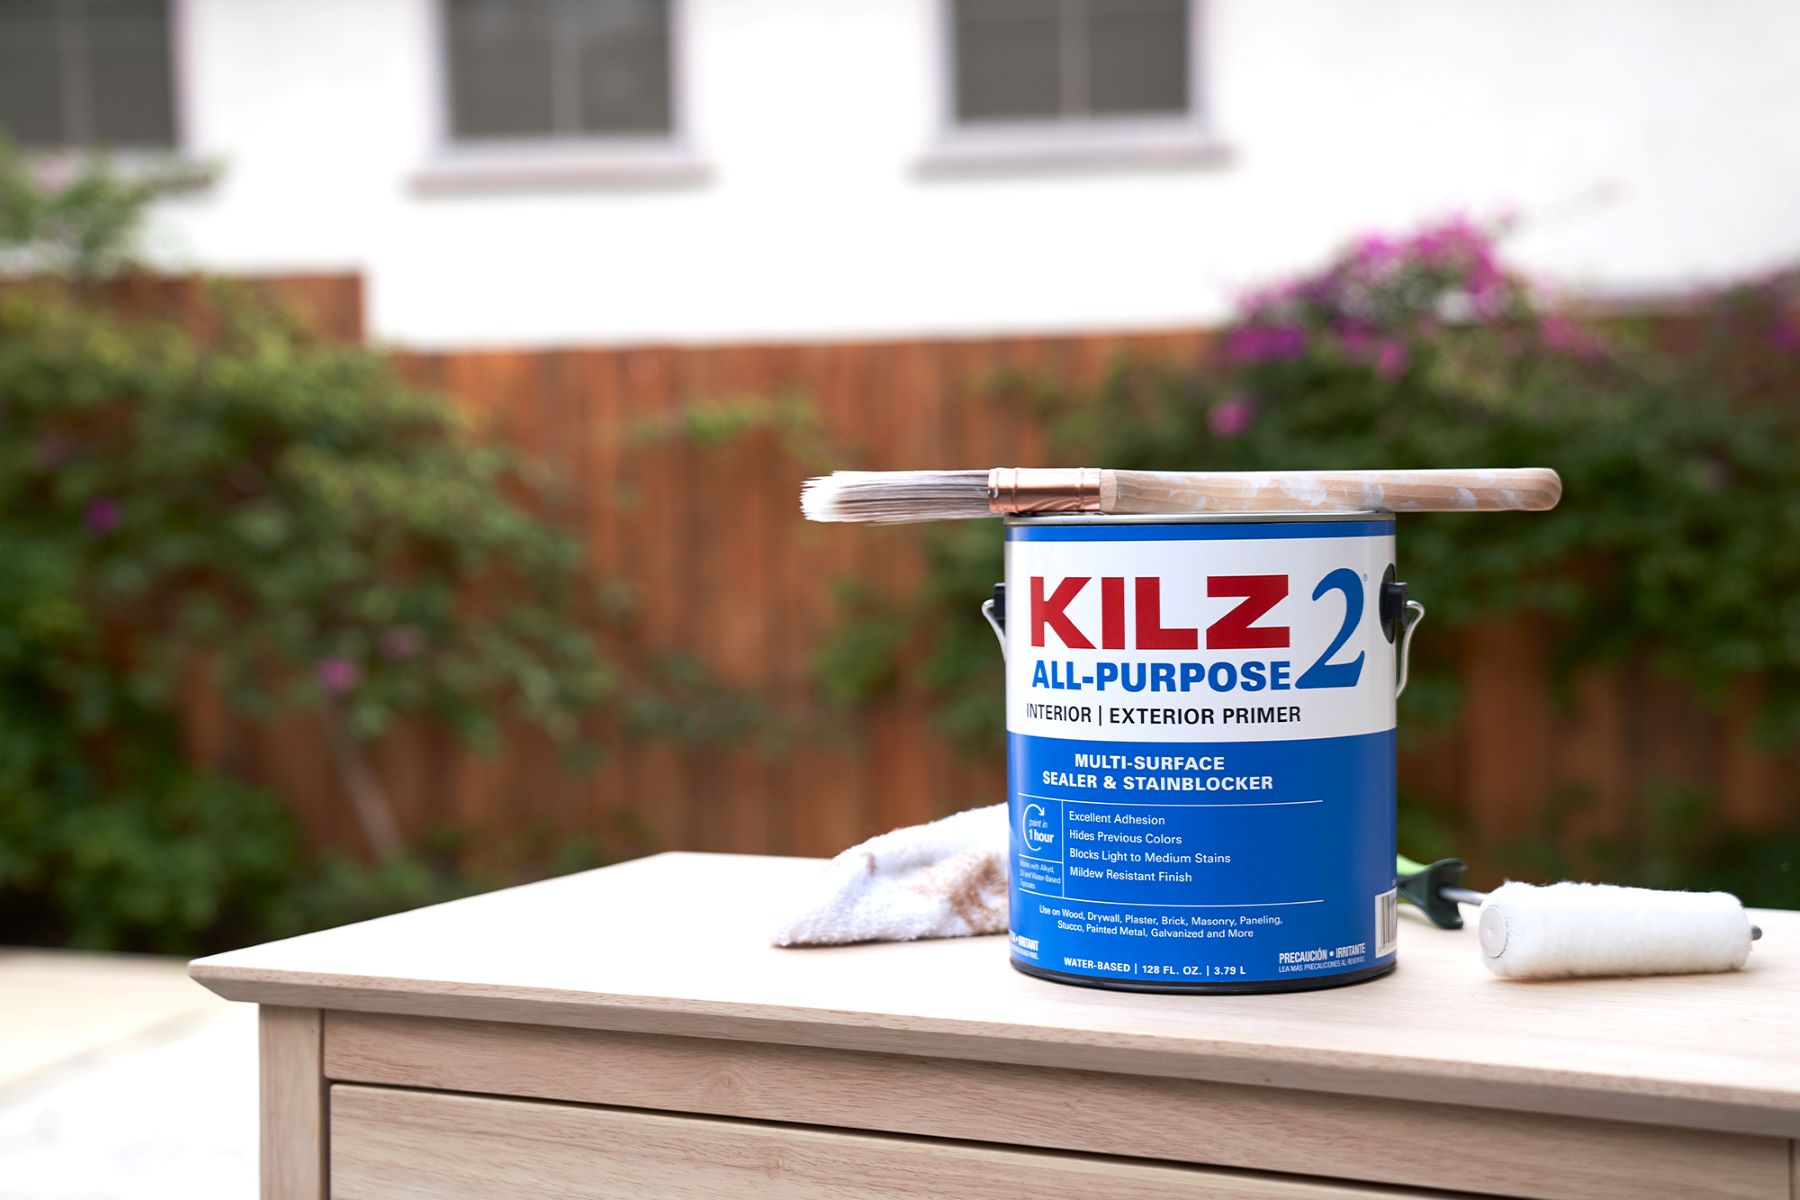 Discover The Ultimate Mold-Fighting Power Of KILZ Paint!